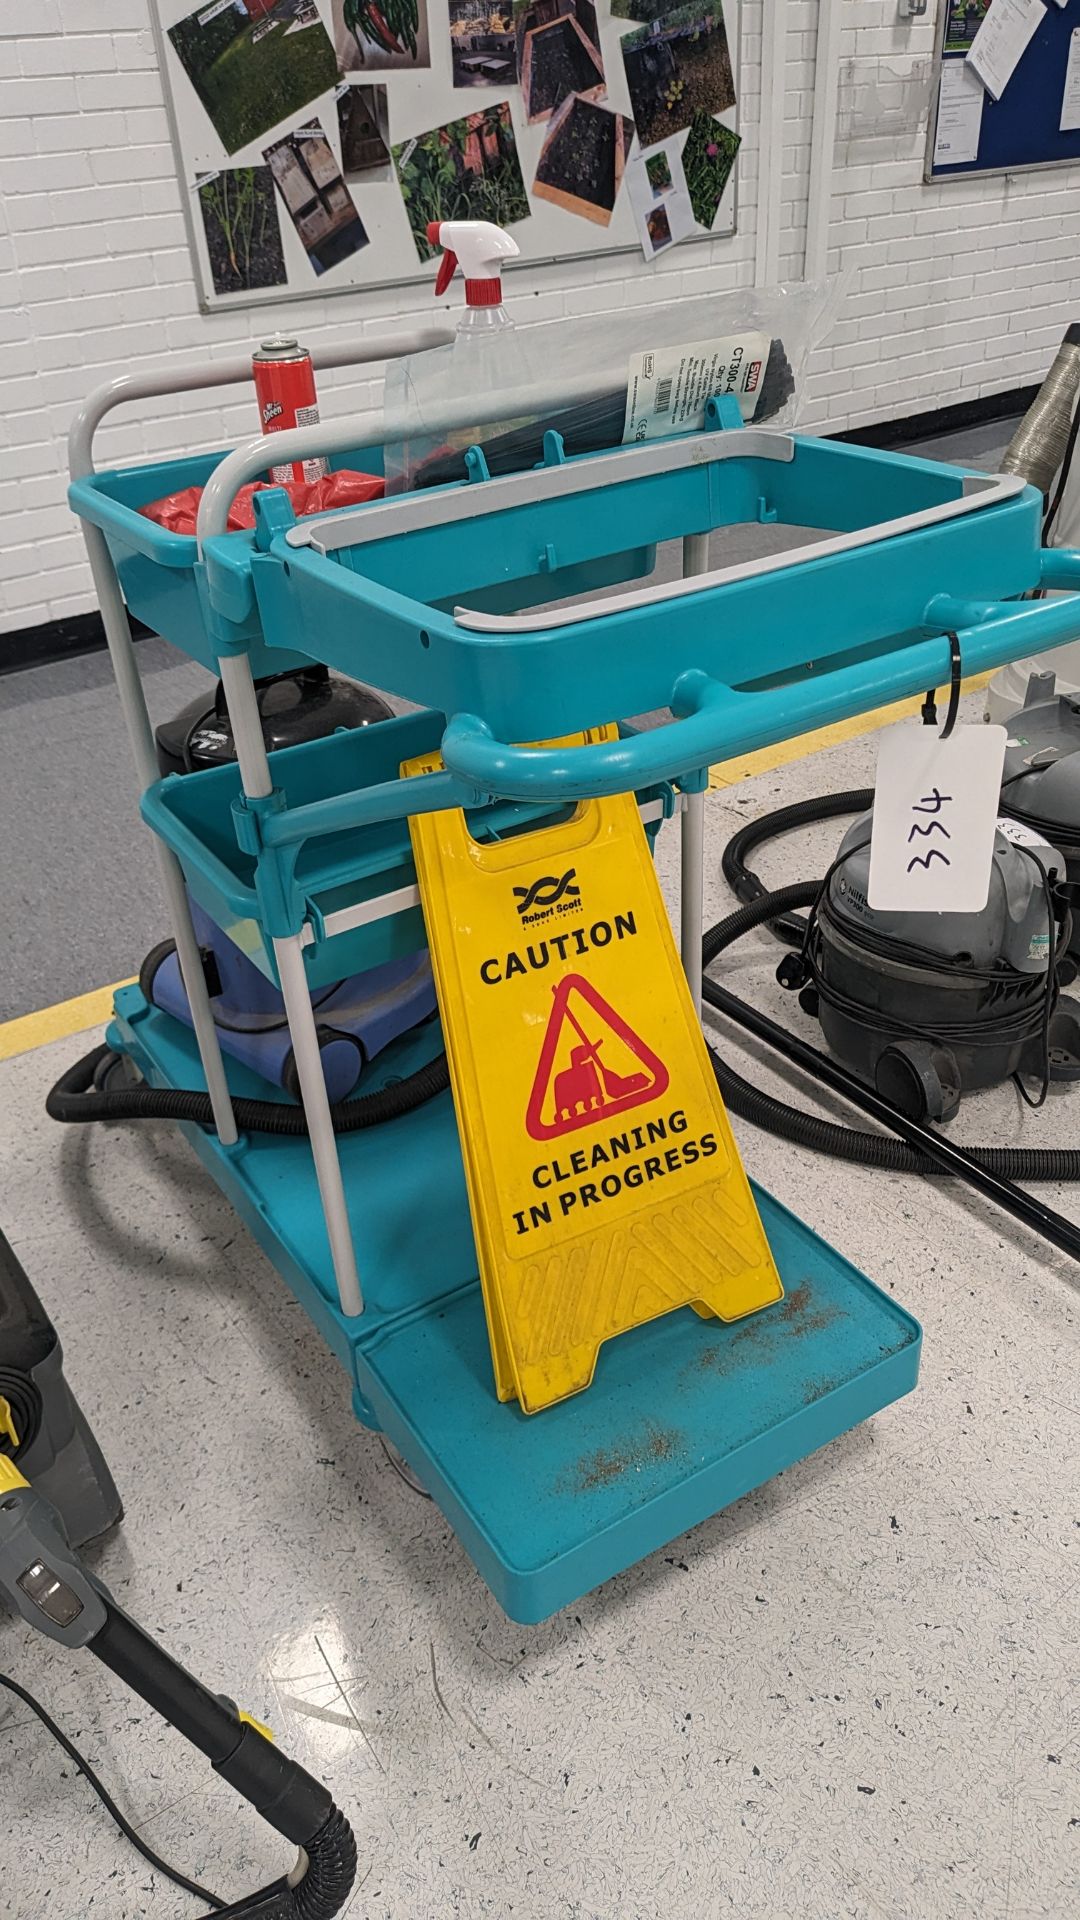 Cleaning trolley with Numatic CVC370-2 vacuum